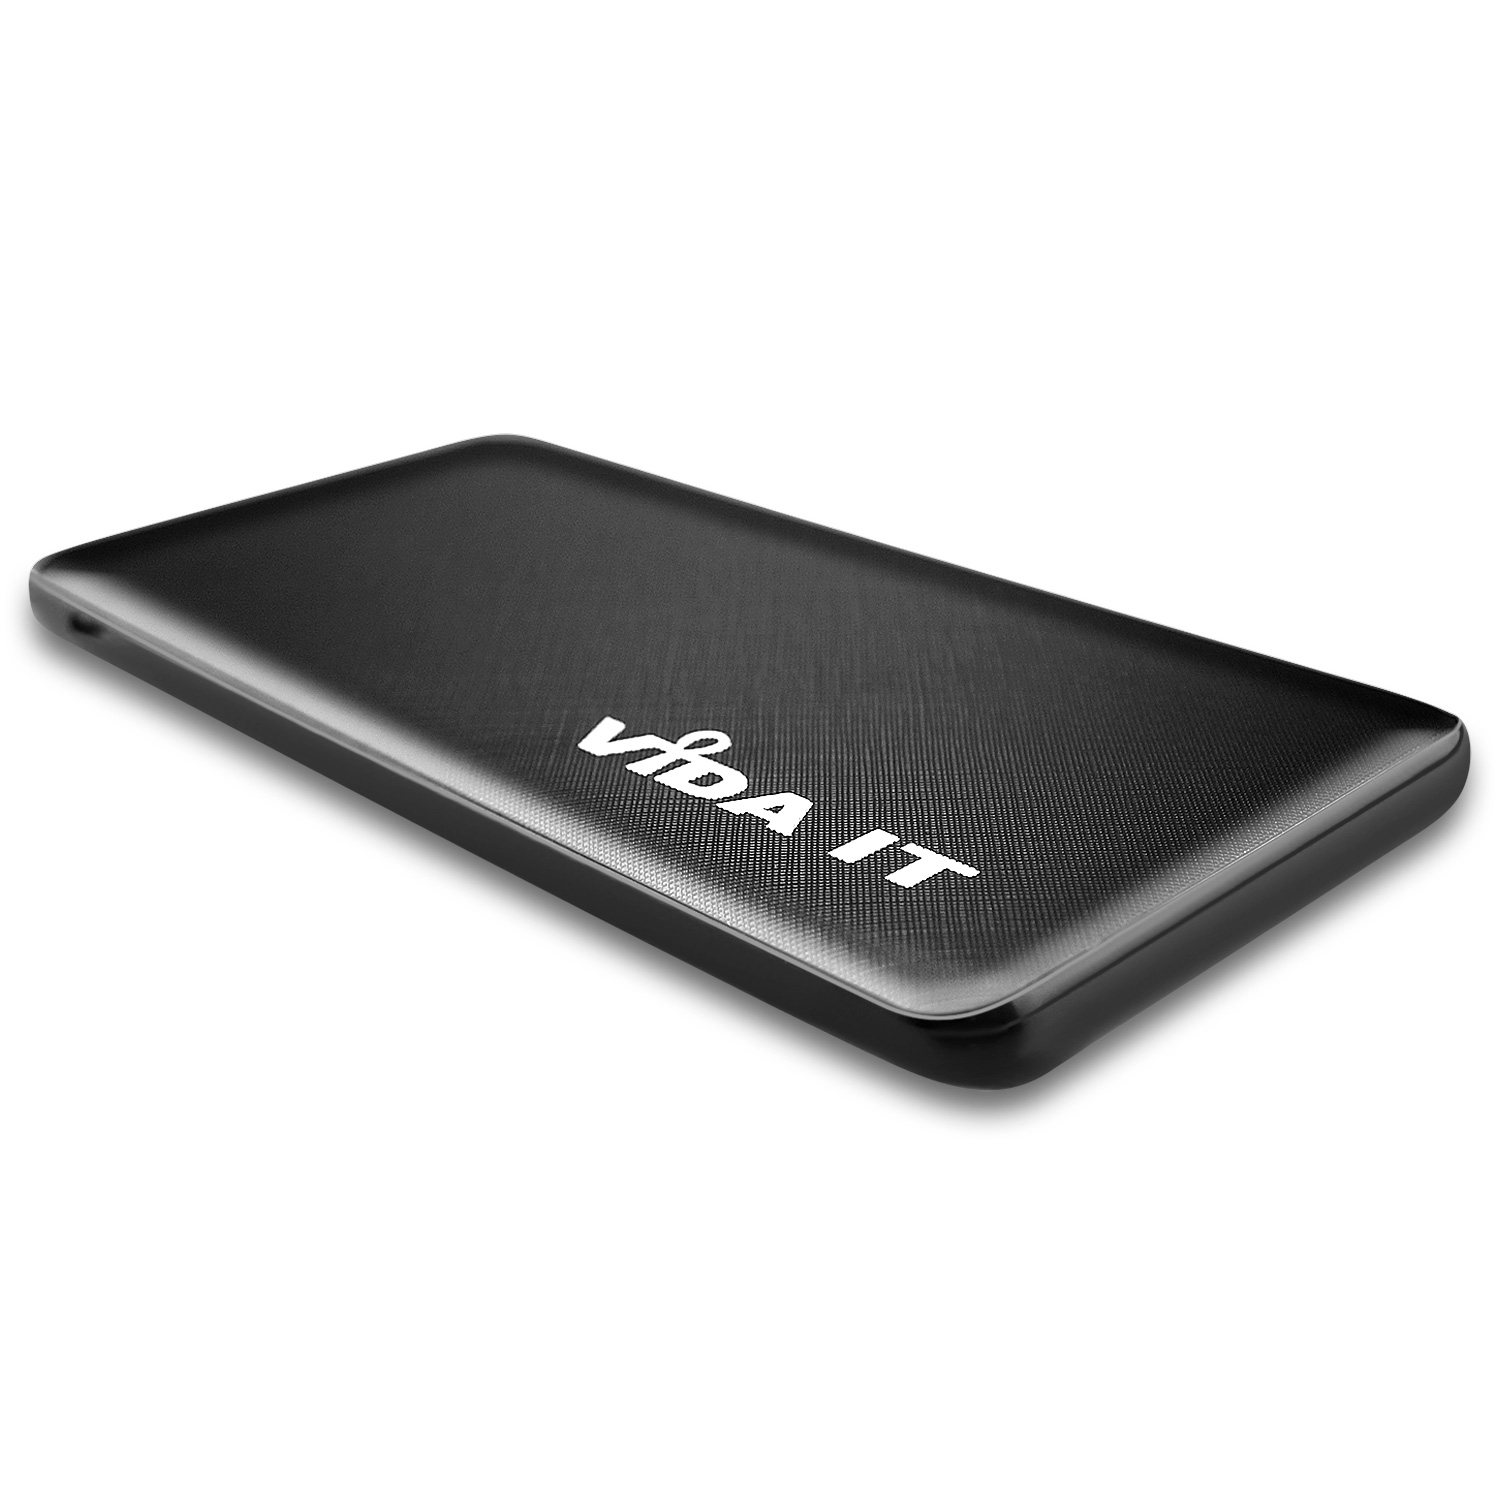 Vida IT V506 Lightweight 9mm Slim Design Travel 3 Port 5000mAh Power Bank Fast Charging 2A Portable External Emergency Battery Pack USB Charger in Black Colour with USB cable and iPhone and USB-C Adapters